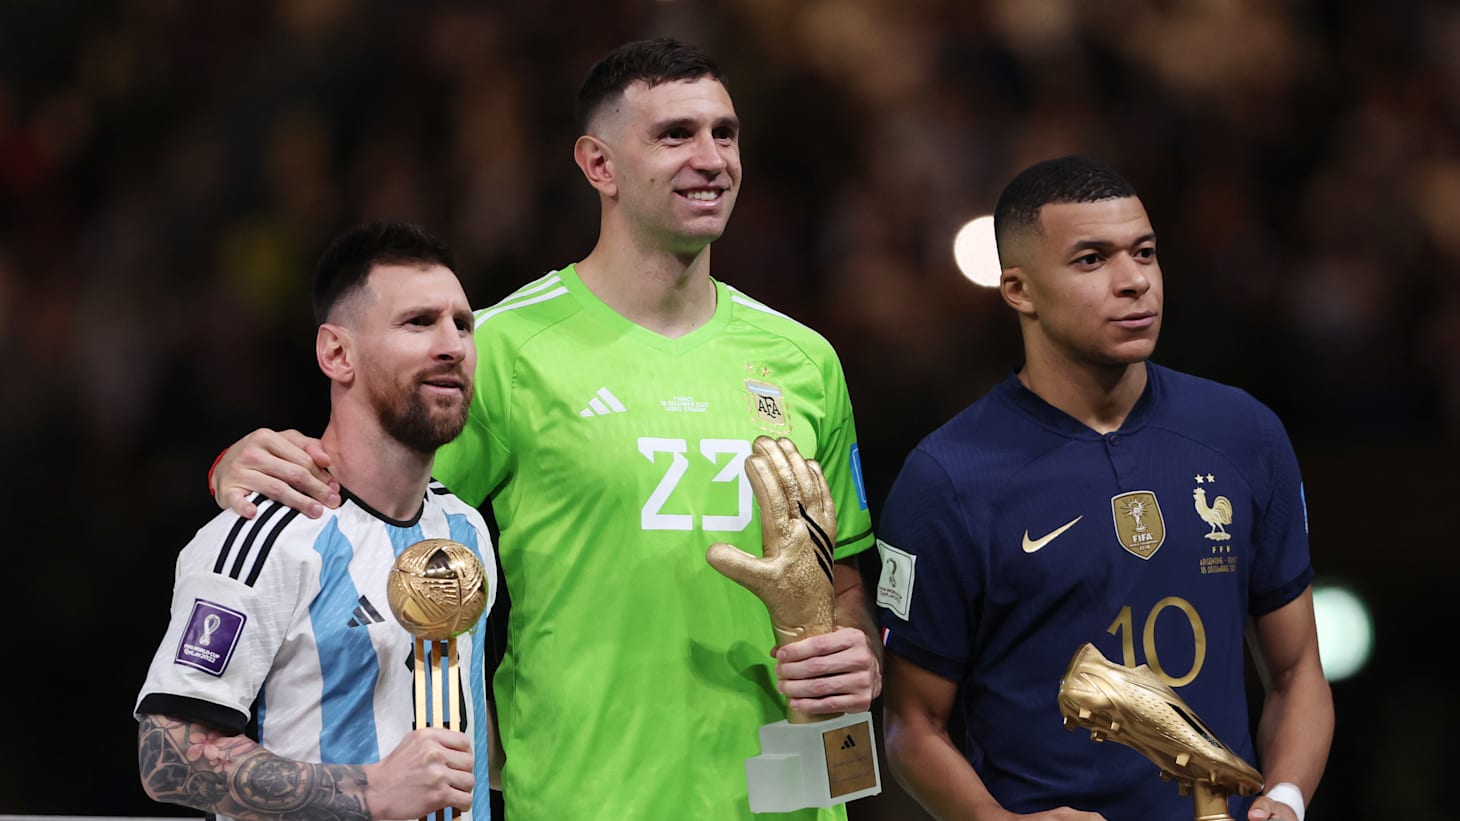 Who are the FIFA World Cup golden glove winners?